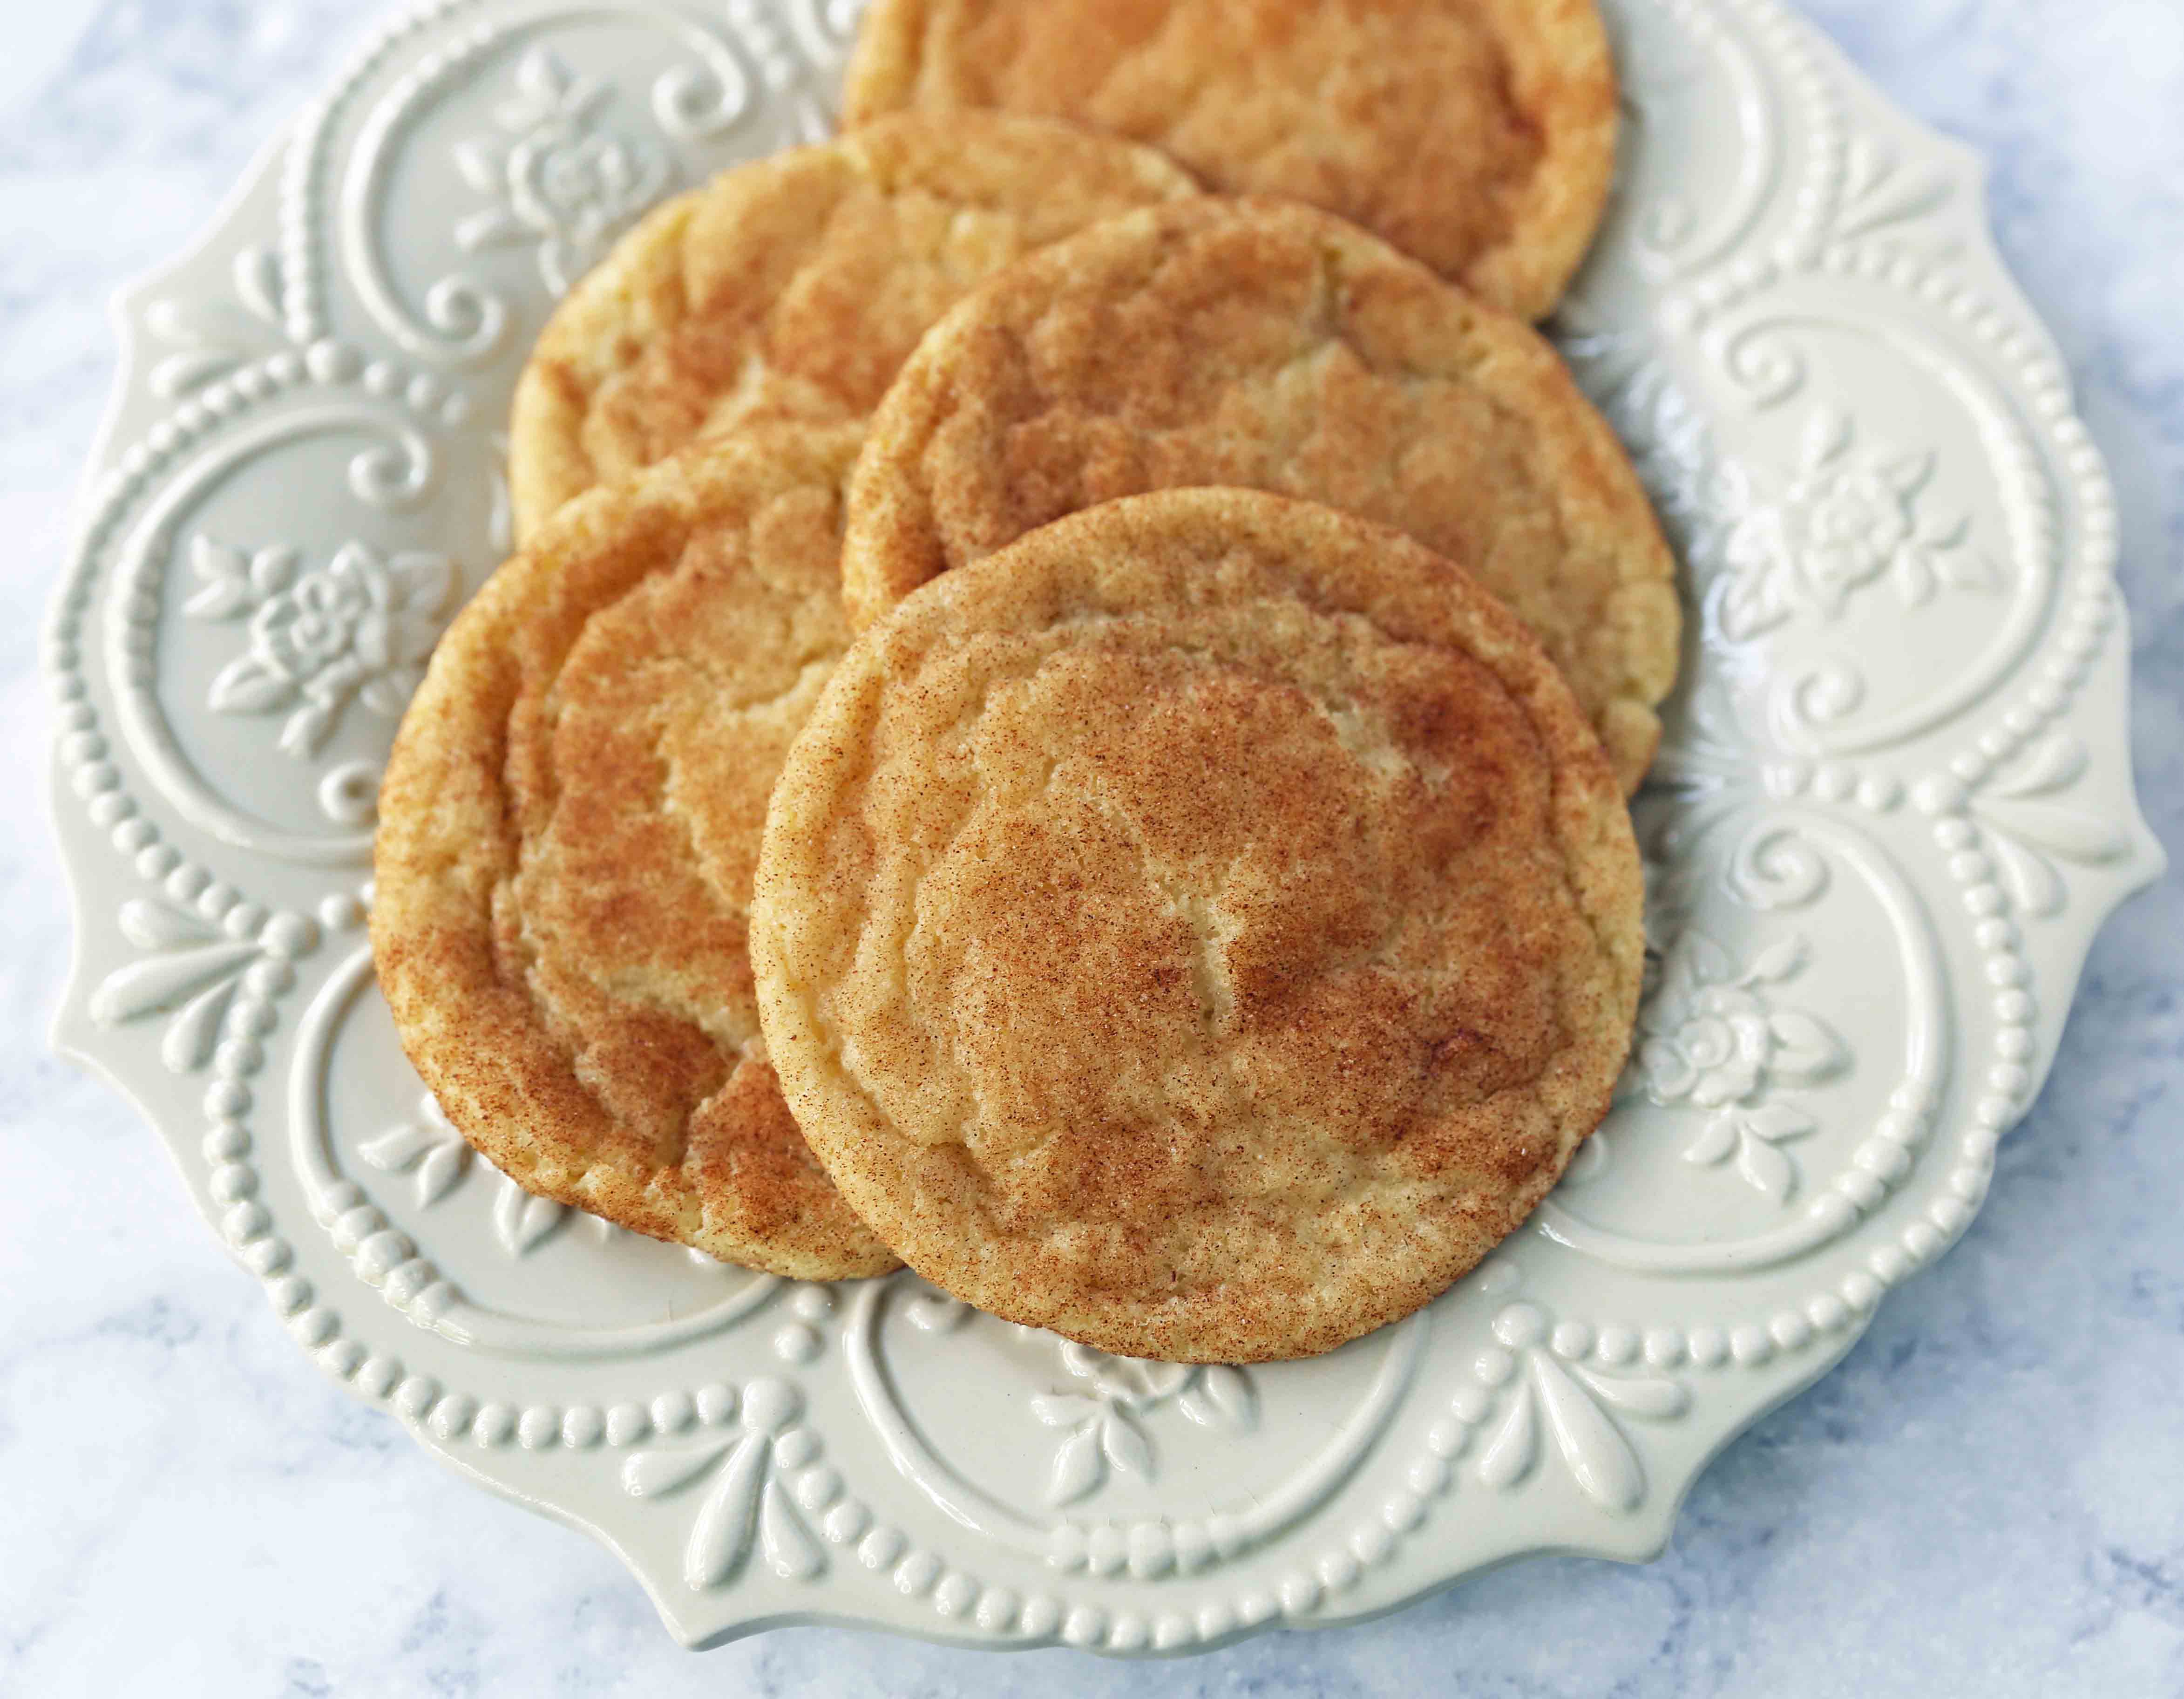 The Best Snickerdoodle Cookie Recipe. Soft and Chewy Snickerdoodle Cookies. The popular cinnamon-sugar soft and chewy sugar cookie recipe. A recipe that has been in the family for over 30 years! #snickerdoodle #snickerdoodles #snickerdoodlecookies #snickerdoodlecookie #cookie #cookies #christmascookies #christmascookies www.modernhoney.com